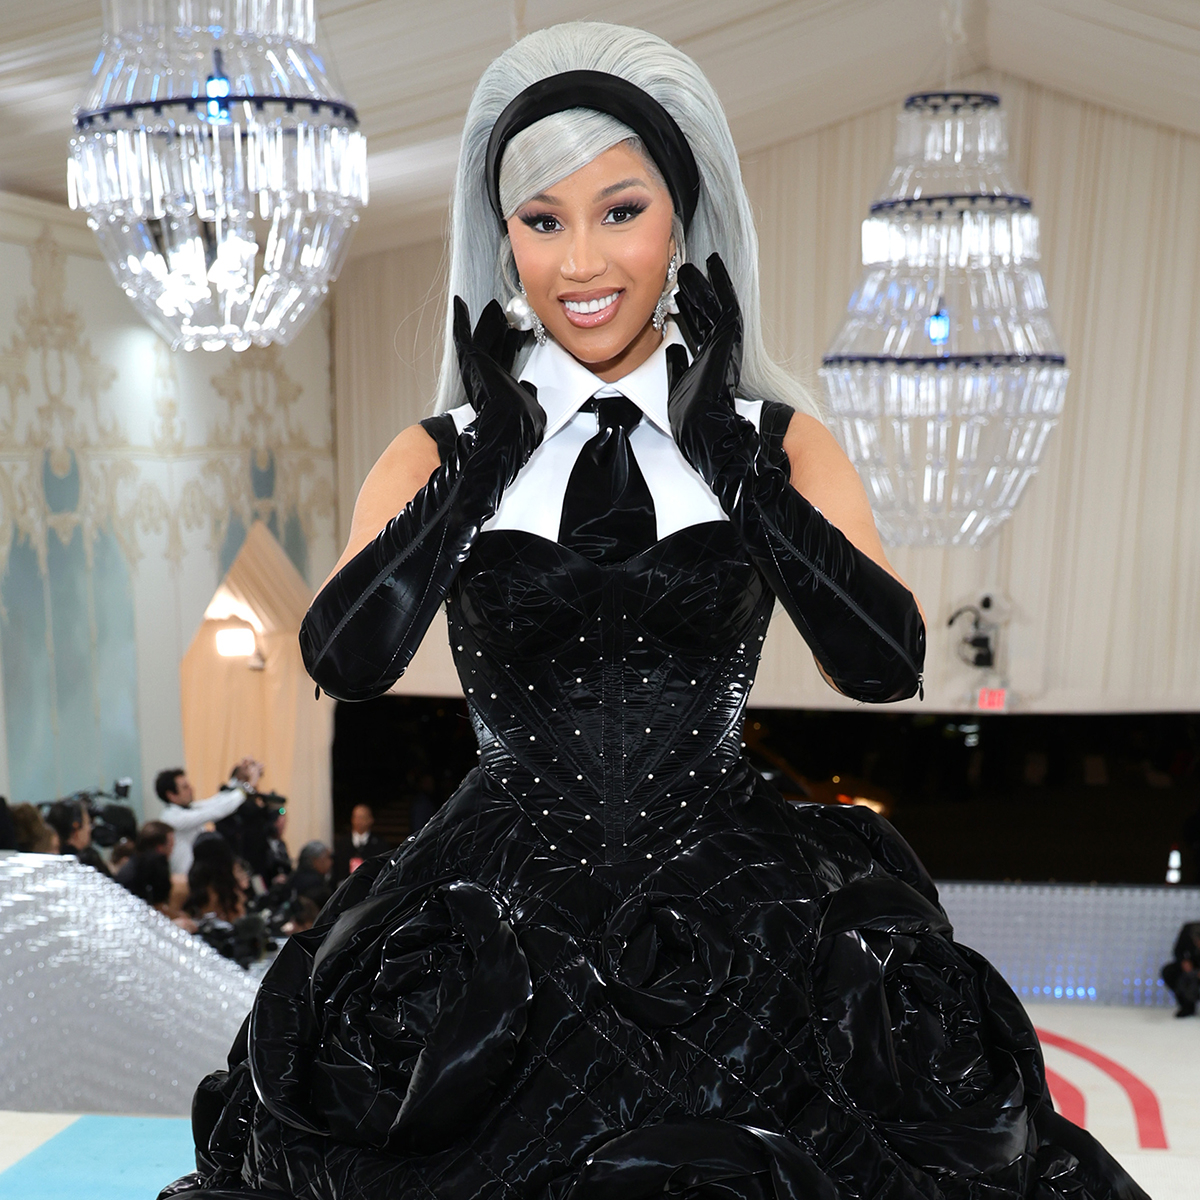 Met Gala: Cardi B Makes an Outfit Change From Hotel to Red Carpet